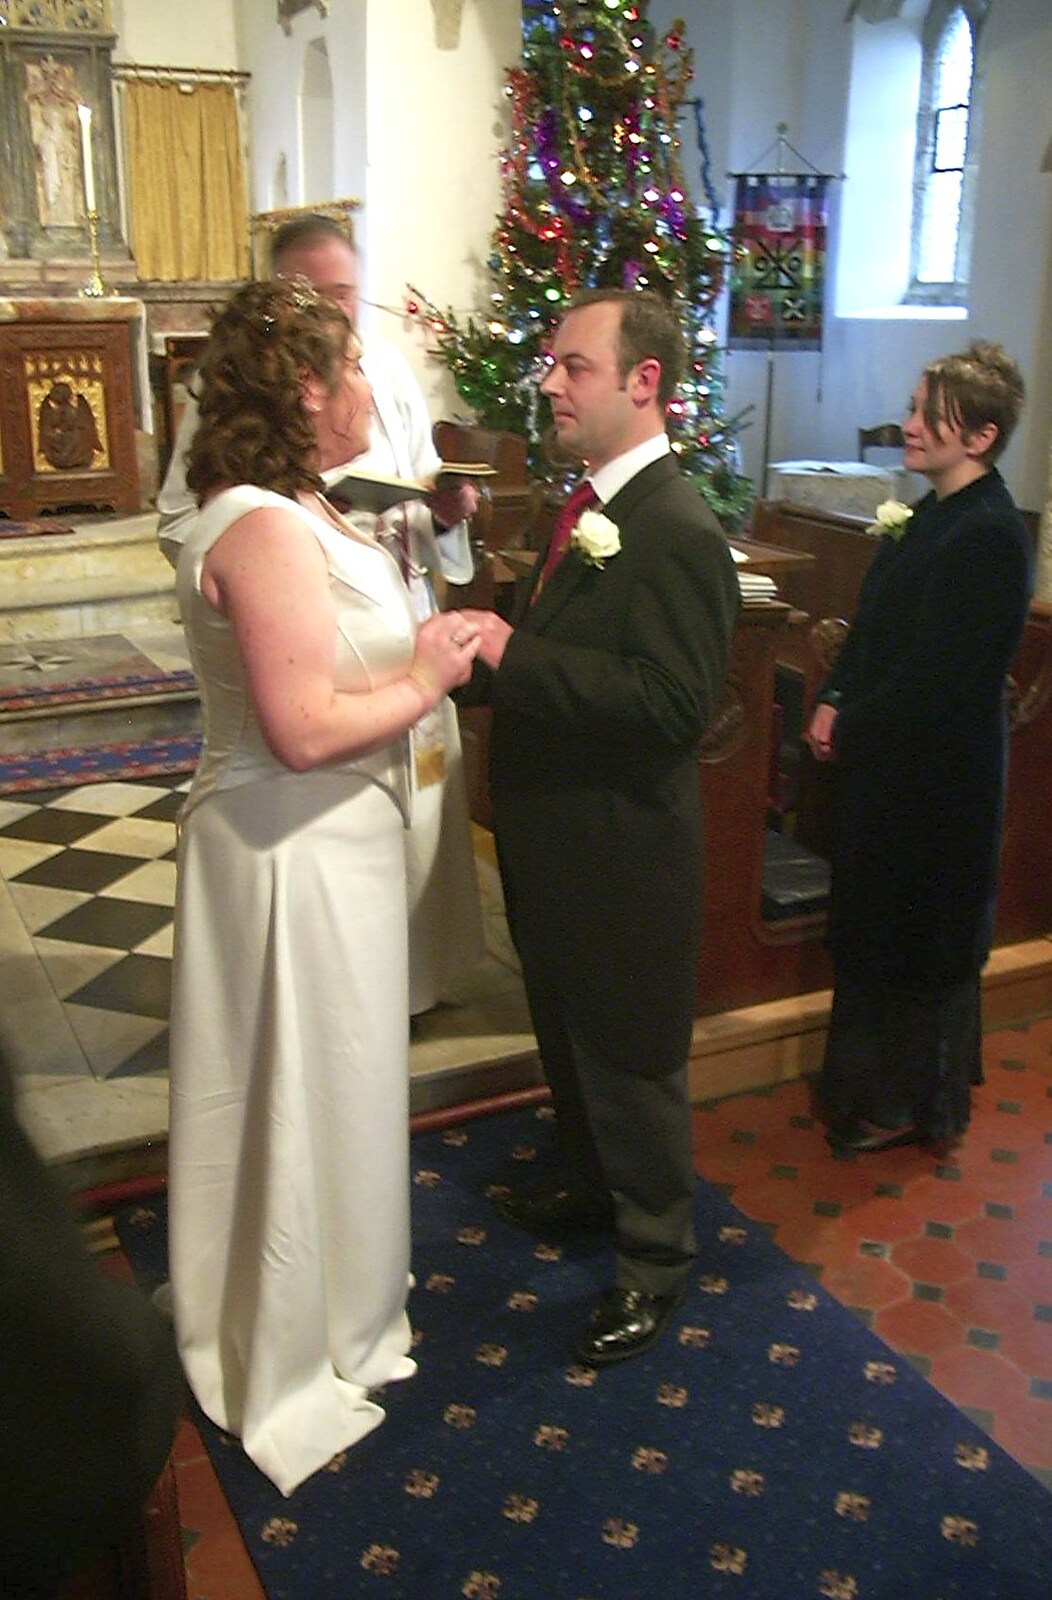 Sis and Matt exchange vows from Sis's Nearly-Christmas Wedding, Meavy, Dartmoor - 20th December 2003